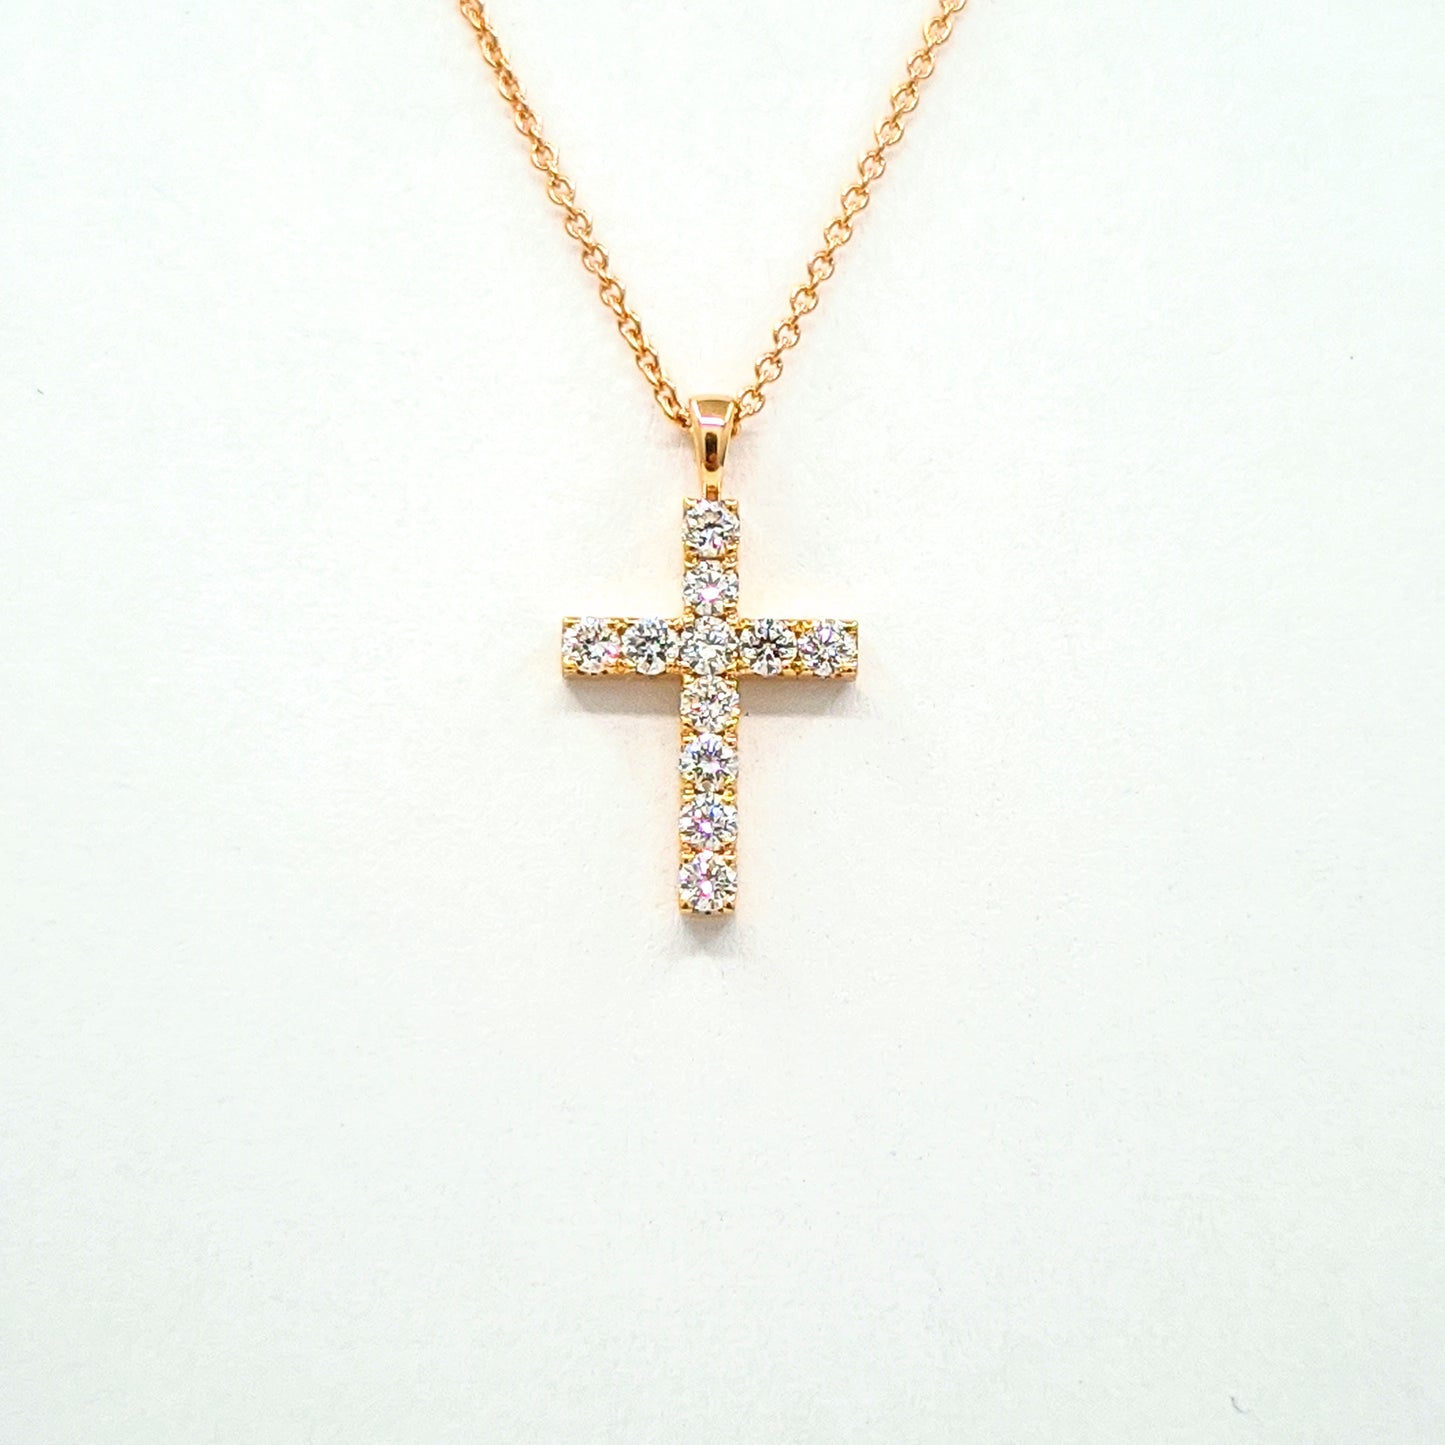 Round Diamond 0.3ct small Pendant/ Dainty Simple Cross Necklace / Adjustable Length /14K Gold Cross Necklace / Gift for Her